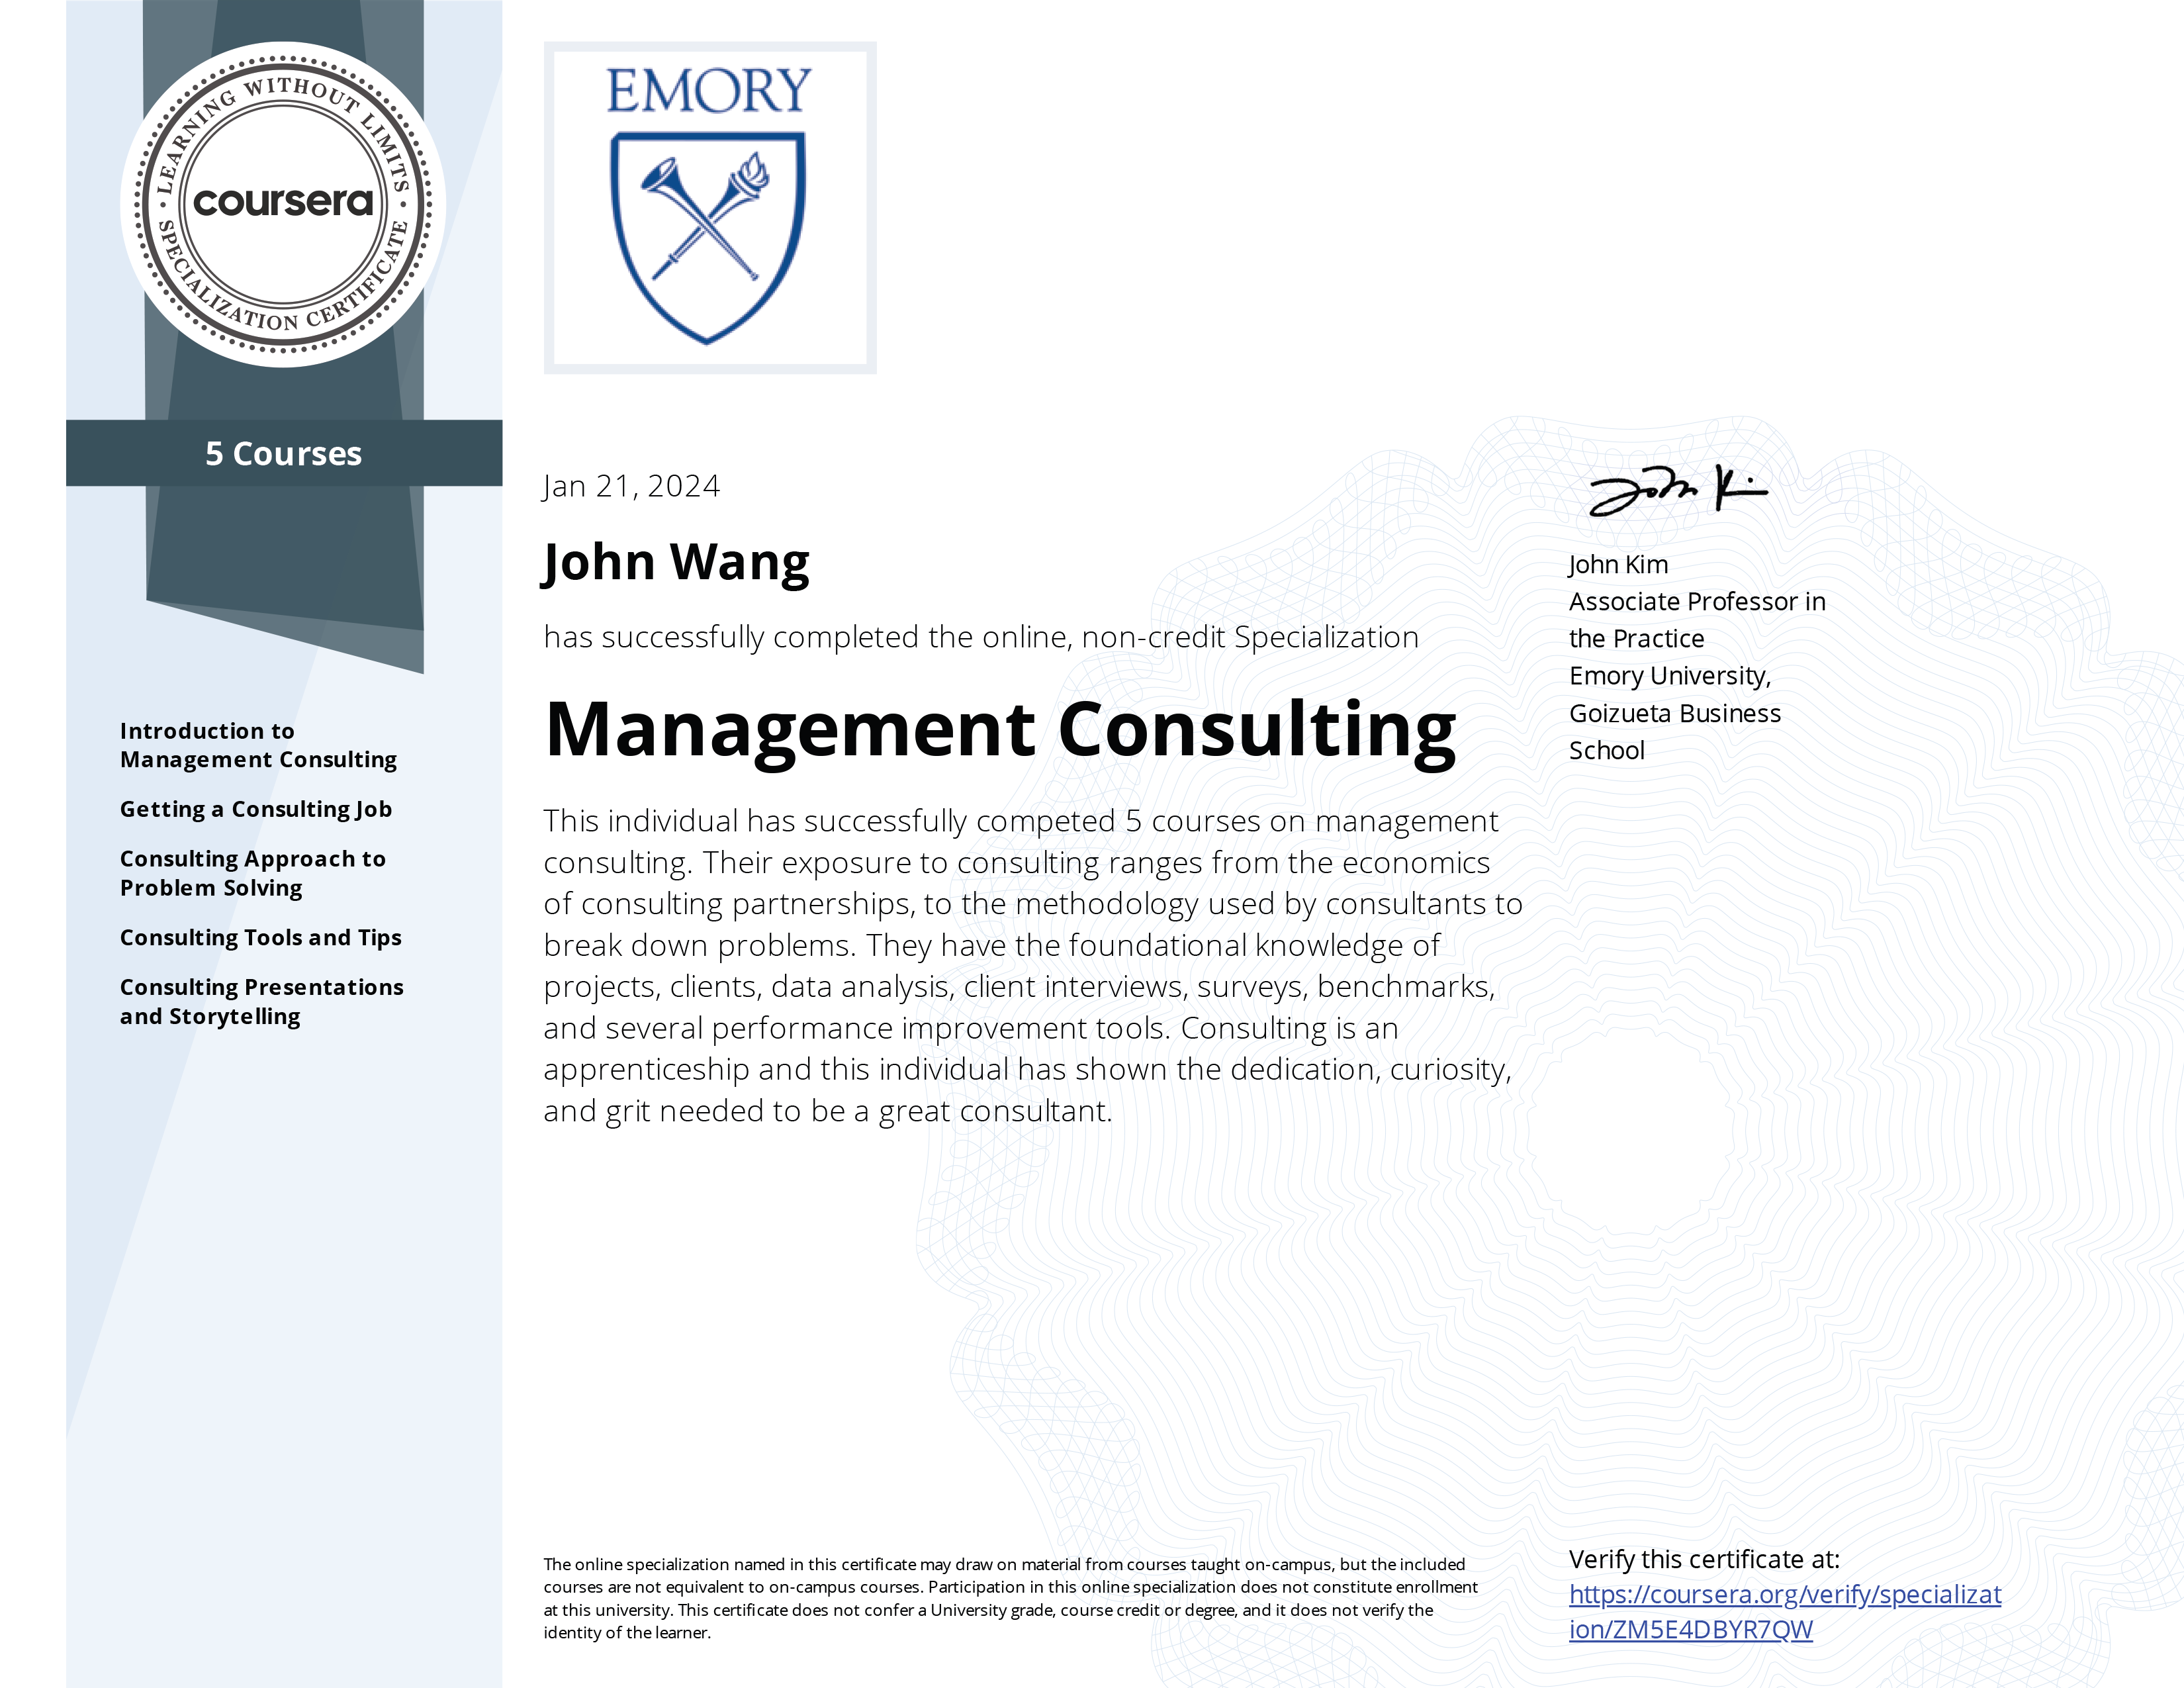 John's Management Consulting Specialization (5 Courses) from Emory University by John Kim